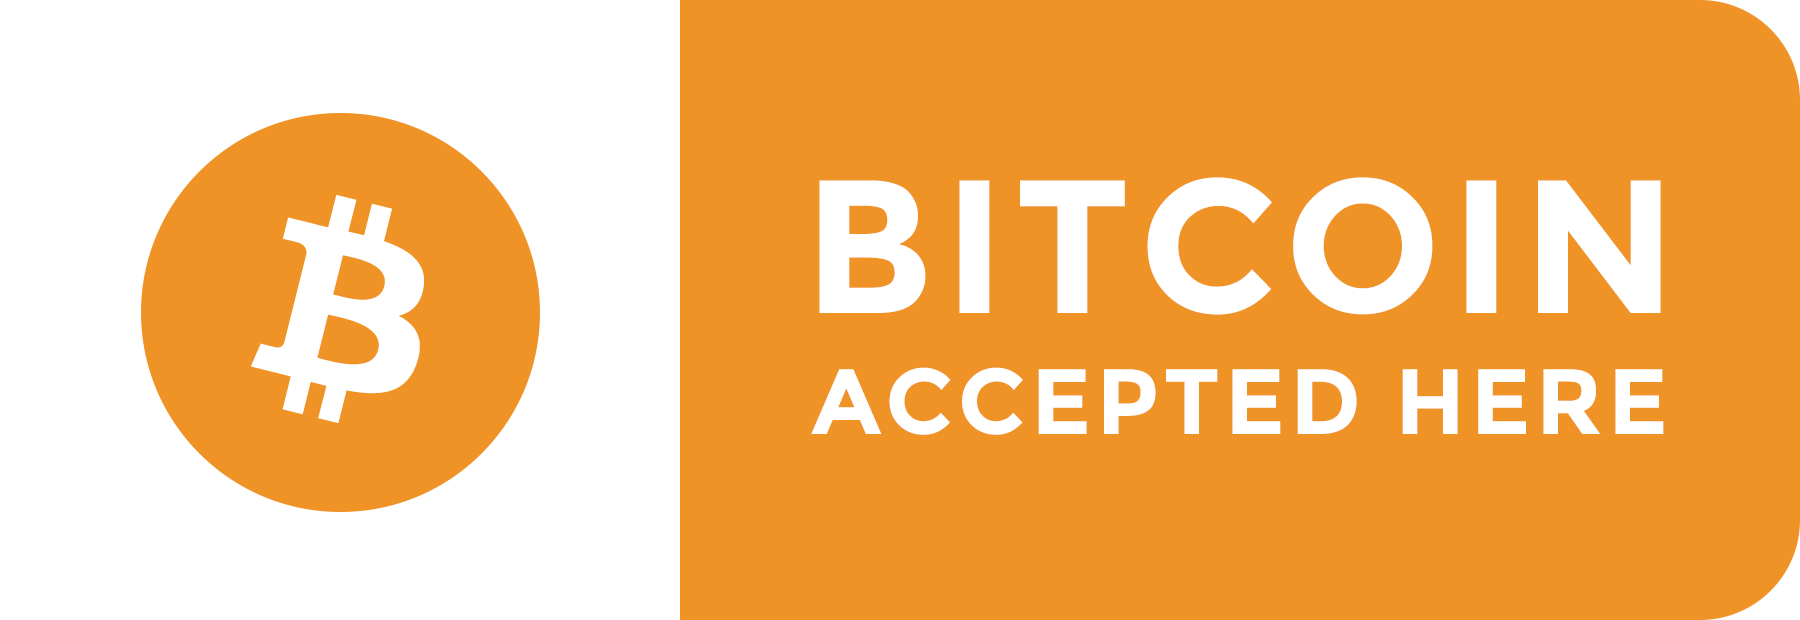 File:Bitcoin accepted here sign horizontal2.png